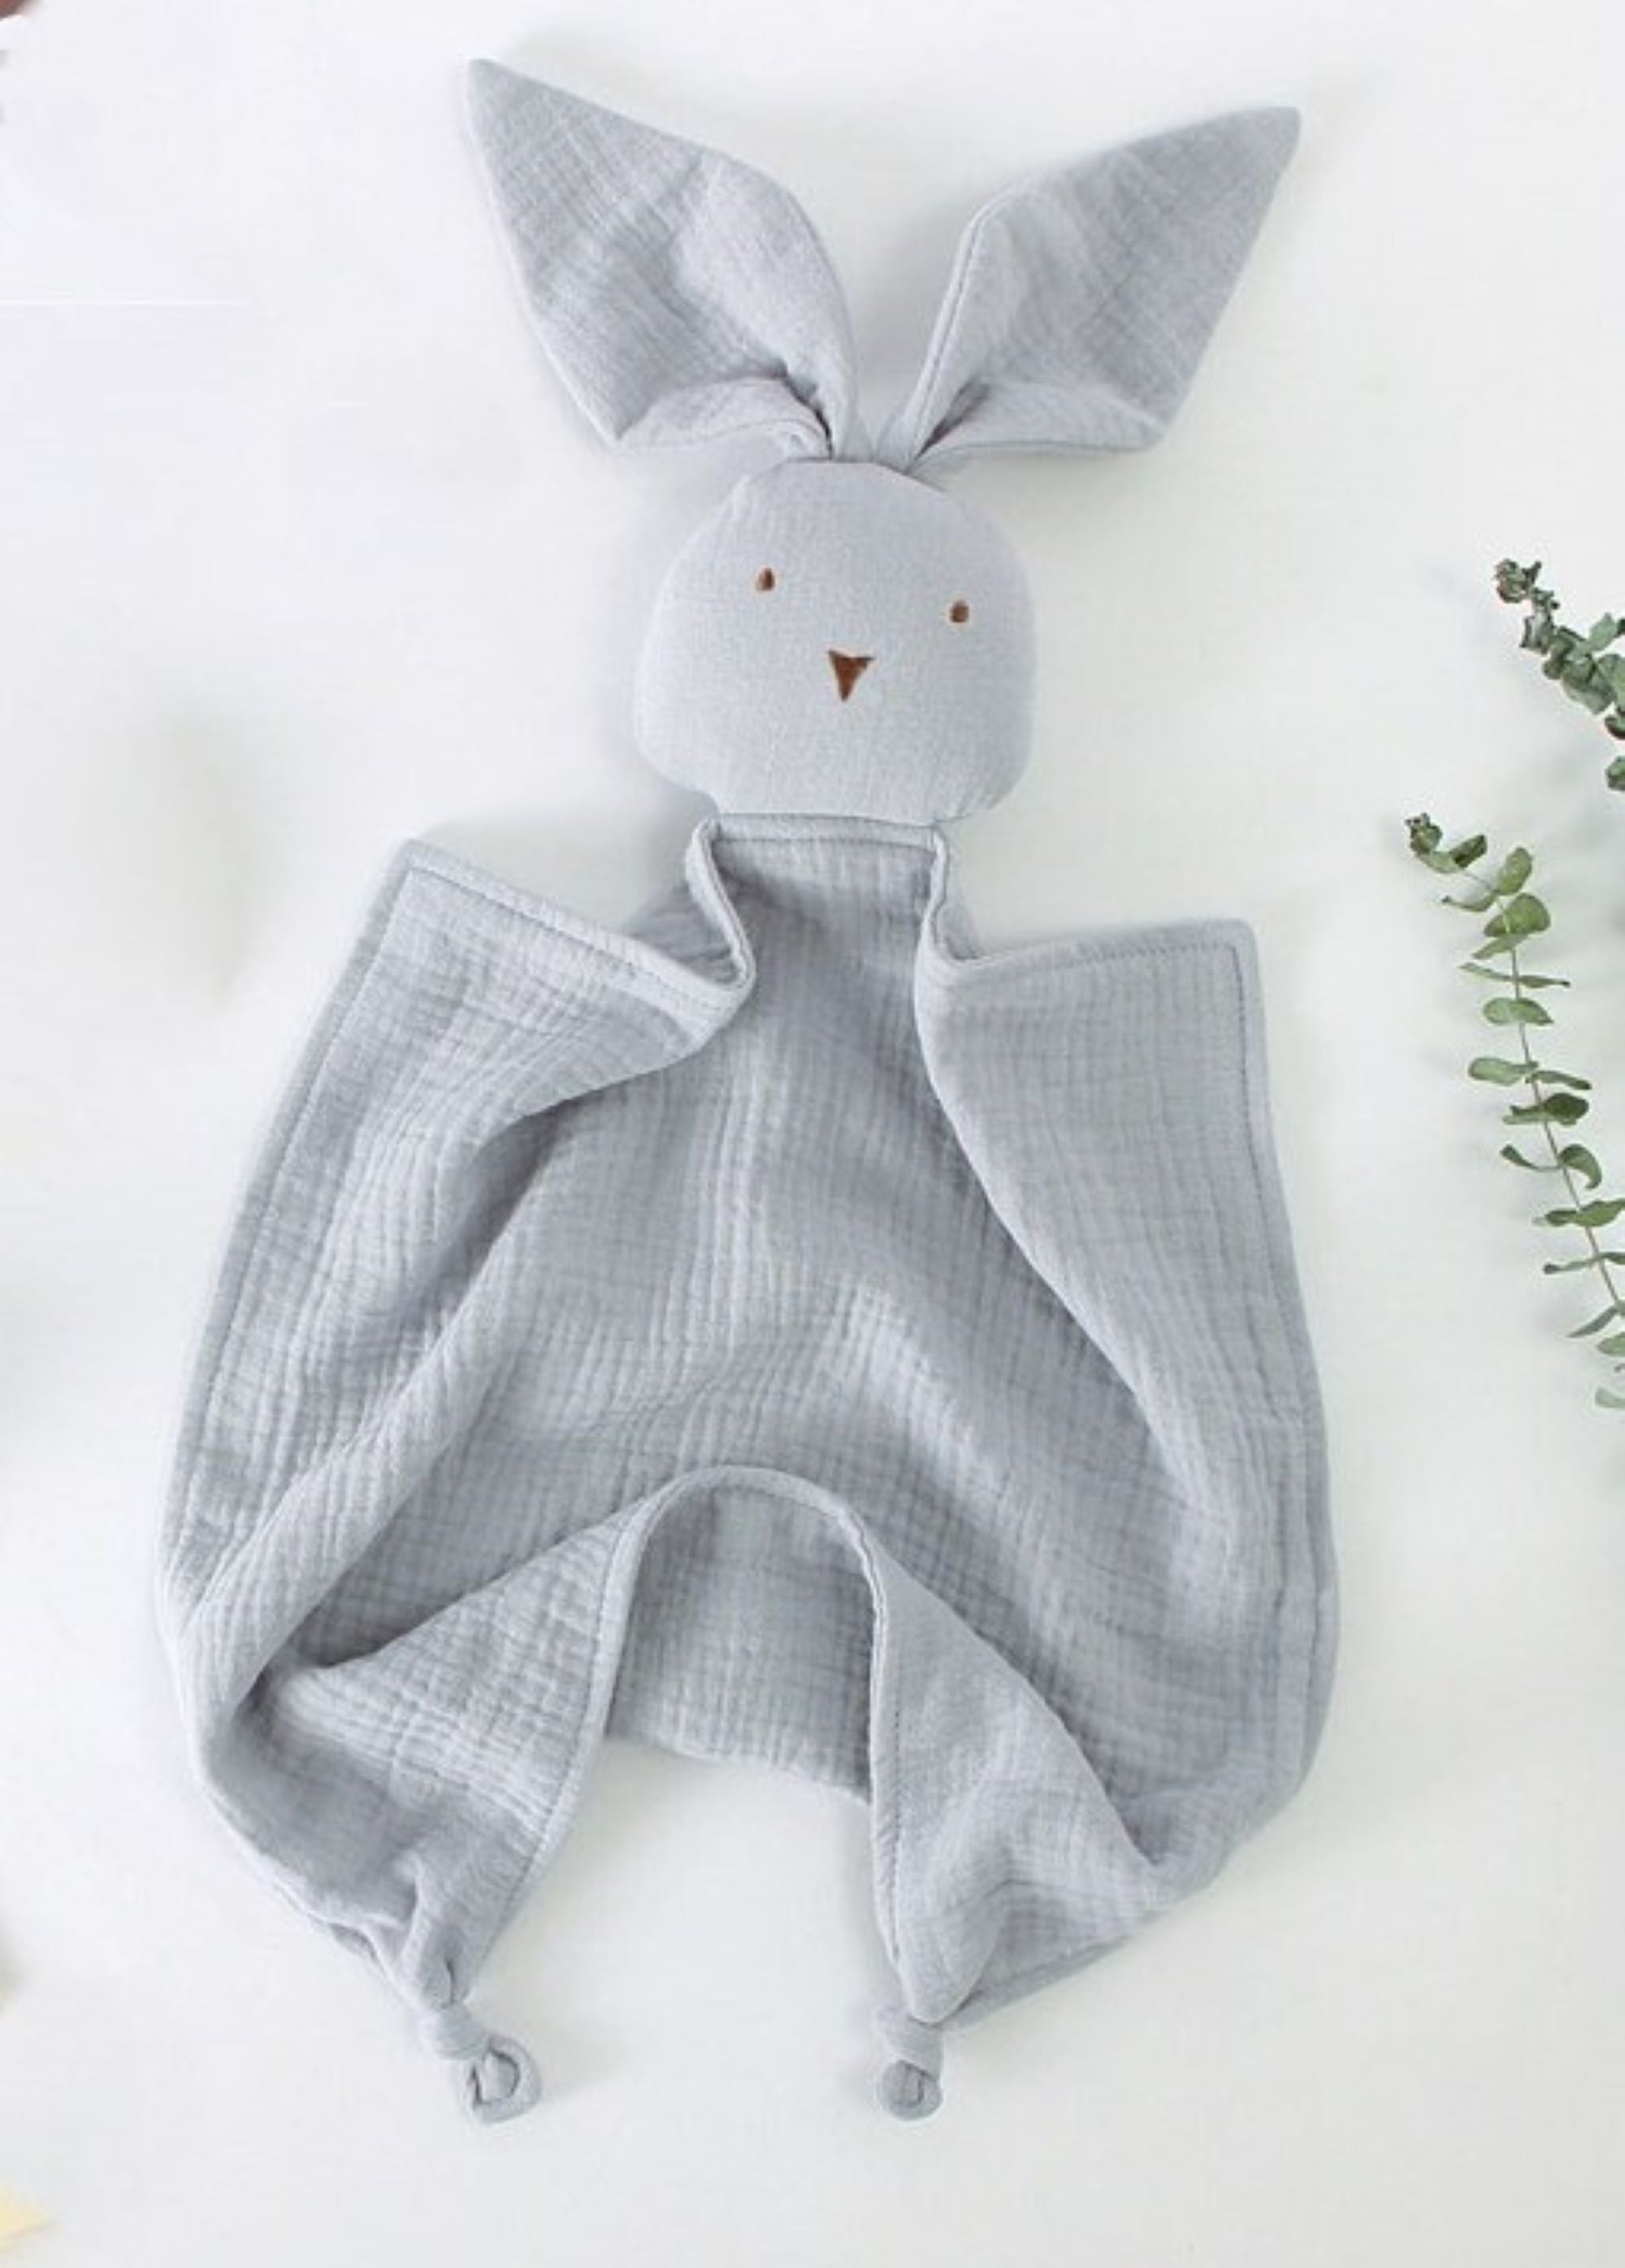 Organic Cotton Bunny Security Blanket/Baby Lovey